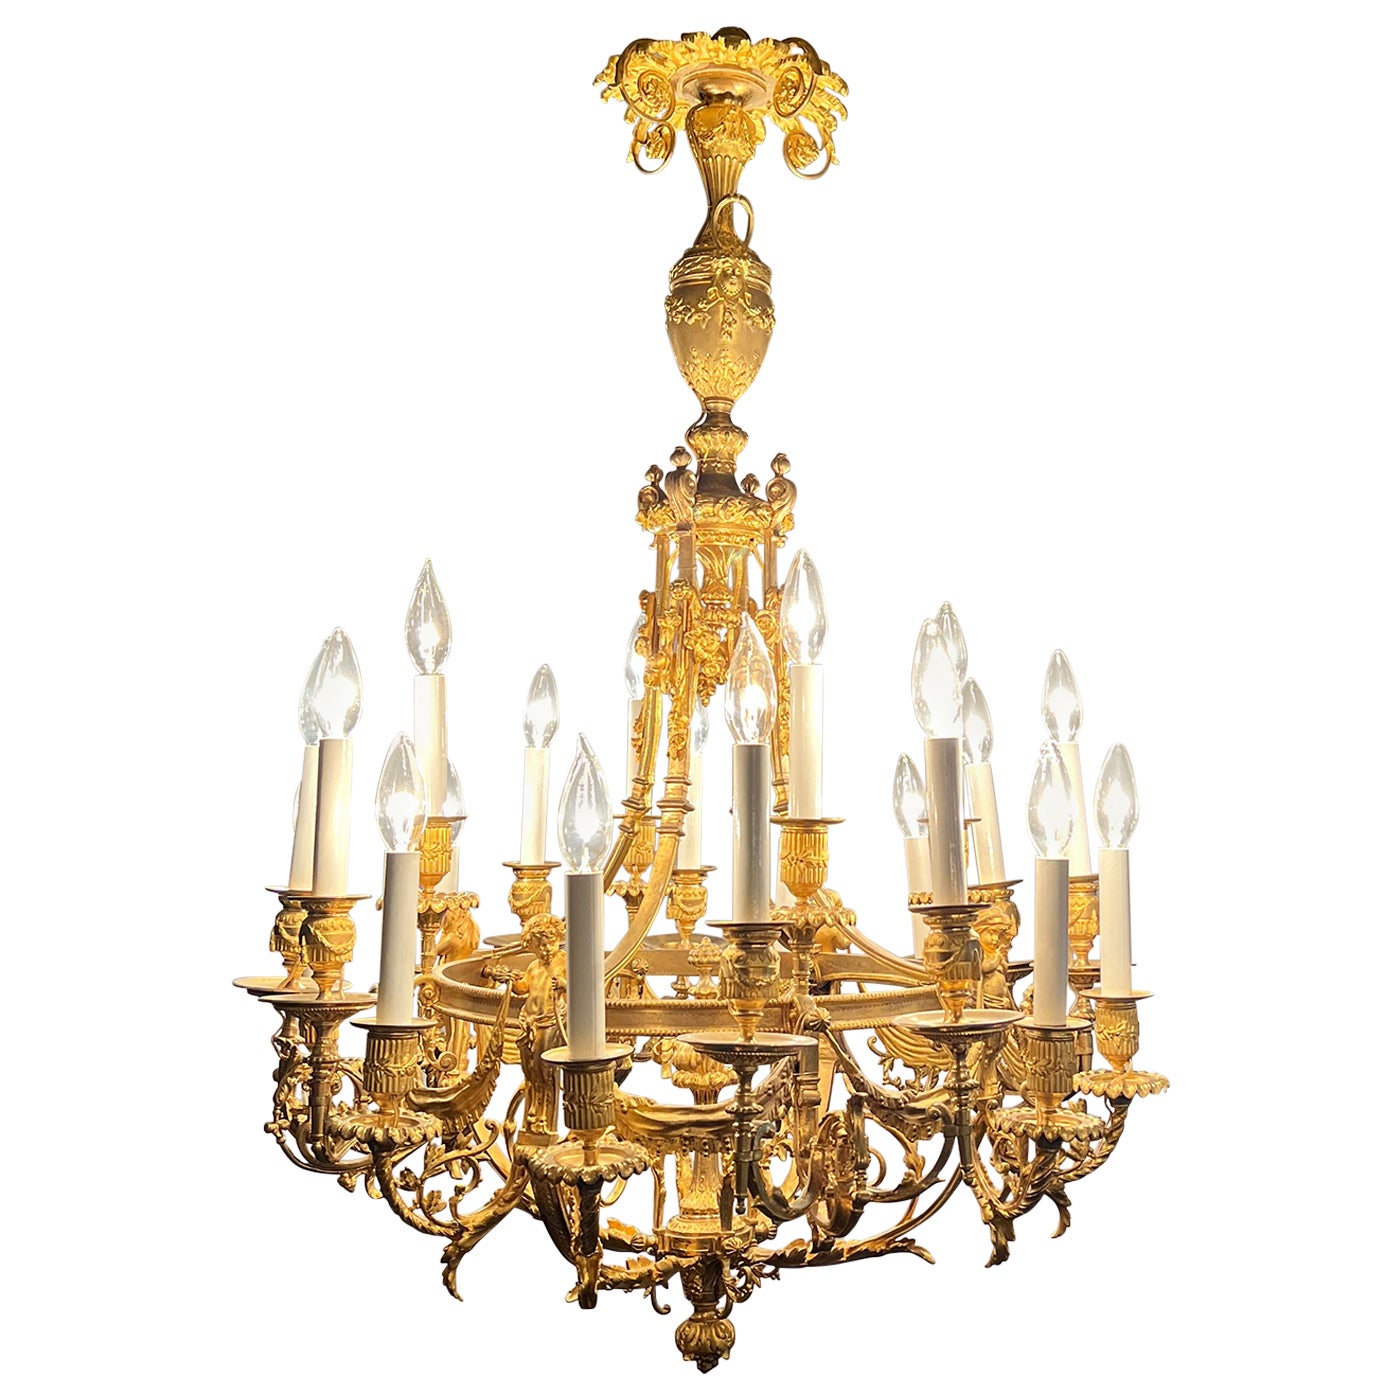 Antique French Finely Chased Bronze D'Ore 20 Light Chandelier, Circa 1870-1880.